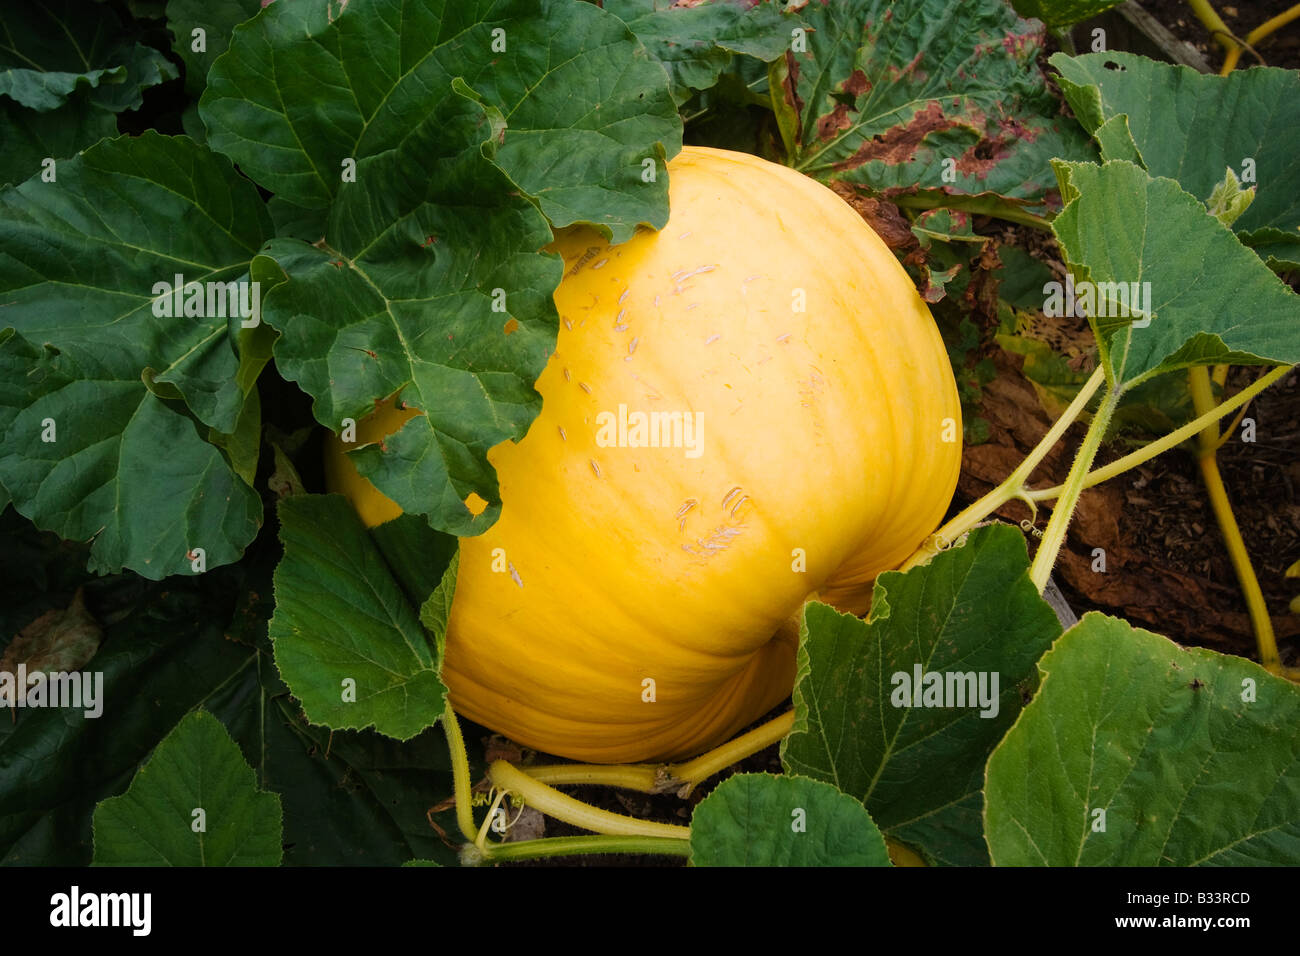 Large yellow pumpkin with green leaves growing in vegetable garden ...